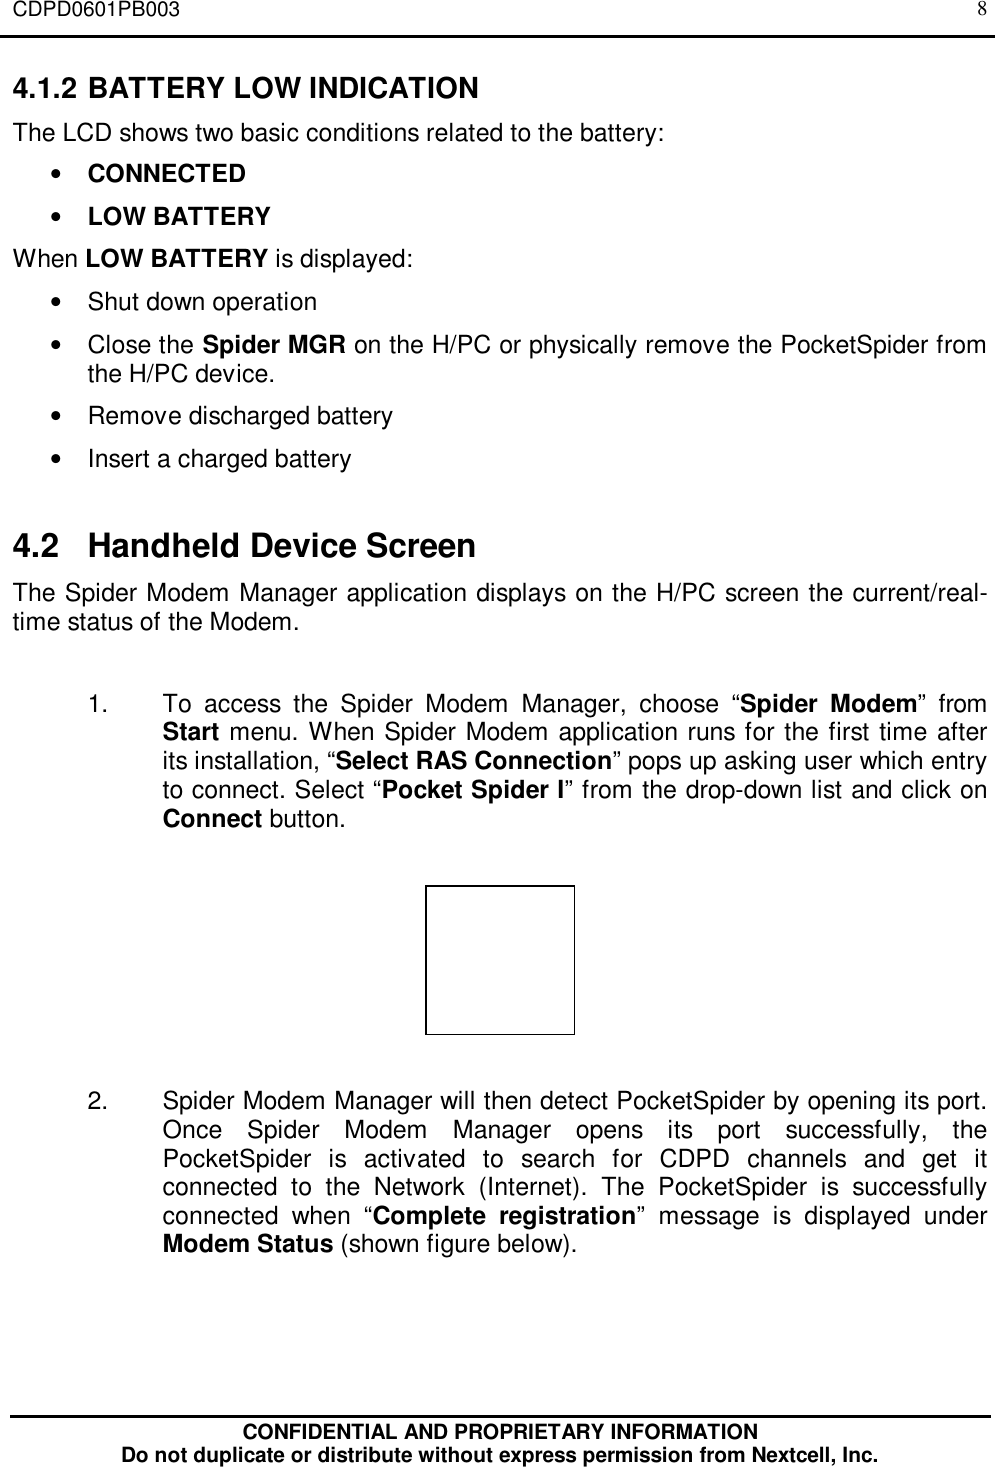 CDPD0601PB003CONFIDENTIAL AND PROPRIETARY INFORMATIONDo not duplicate or distribute without express permission from Nextcell, Inc.84.1.2 BATTERY LOW INDICATIONThe LCD shows two basic conditions related to the battery:• CONNECTED• LOW BATTERYWhen LOW BATTERY is displayed:• Shut down operation• Close the Spider MGR on the H/PC or physically remove the PocketSpider fromthe H/PC device.• Remove discharged battery• Insert a charged battery4.2 Handheld Device ScreenThe Spider Modem Manager application displays on the H/PC screen the current/real-time status of the Modem.1. To access the Spider Modem Manager, choose “Spider Modem” fromStart menu. When Spider Modem application runs for the first time afterits installation, “Select RAS Connection” pops up asking user which entryto connect. Select “Pocket Spider I” from the drop-down list and click onConnect button.2. Spider Modem Manager will then detect PocketSpider by opening its port.Once Spider Modem Manager opens its port successfully, thePocketSpider is activated to search for CDPD channels and get itconnected to the Network (Internet). The PocketSpider is successfullyconnected when “Complete registration” message is displayed underModem Status (shown figure below).